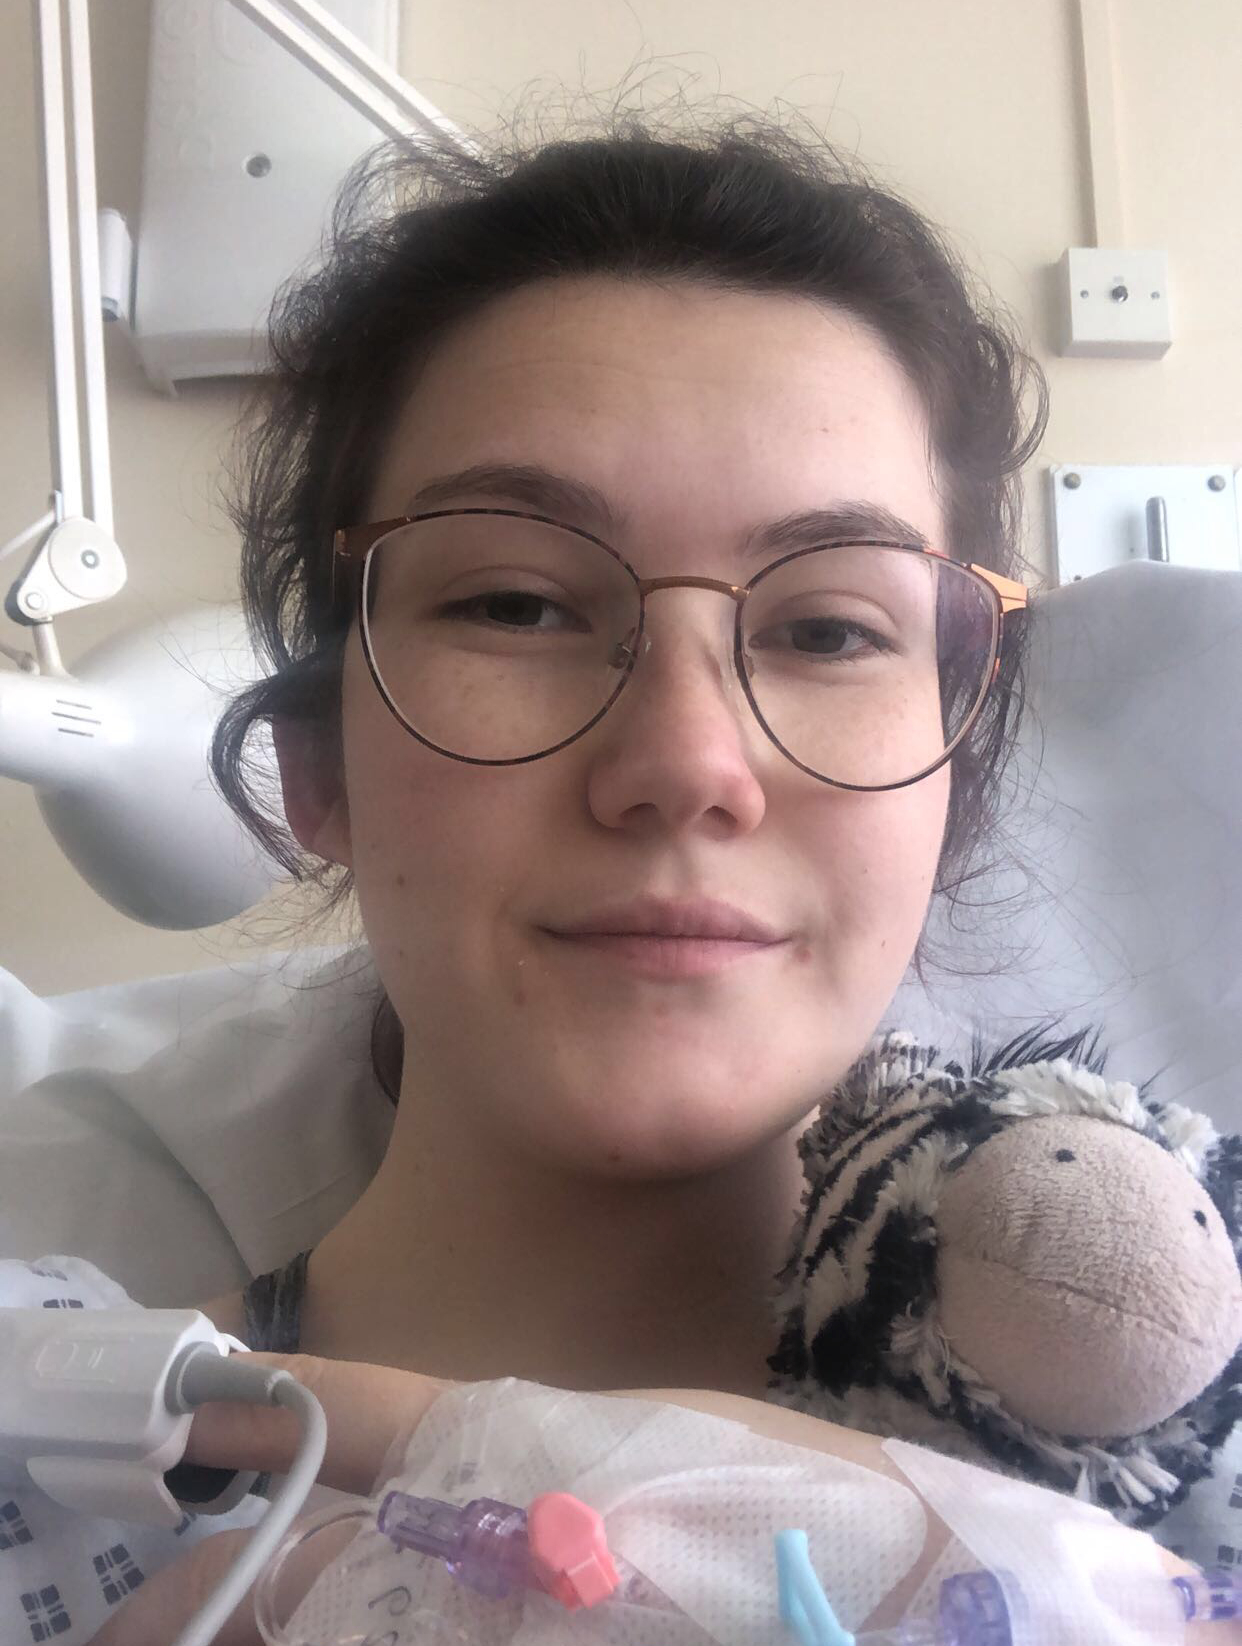 An image of Jo, a white female presenting person with brown hair which has been tied back. Jo has just come out of surgery and is in a hospital gown. In the photo, the cannula in Jo's hand is visible as well as an oximeter on her finger. Jo is also holding a cuddly zebra toy.